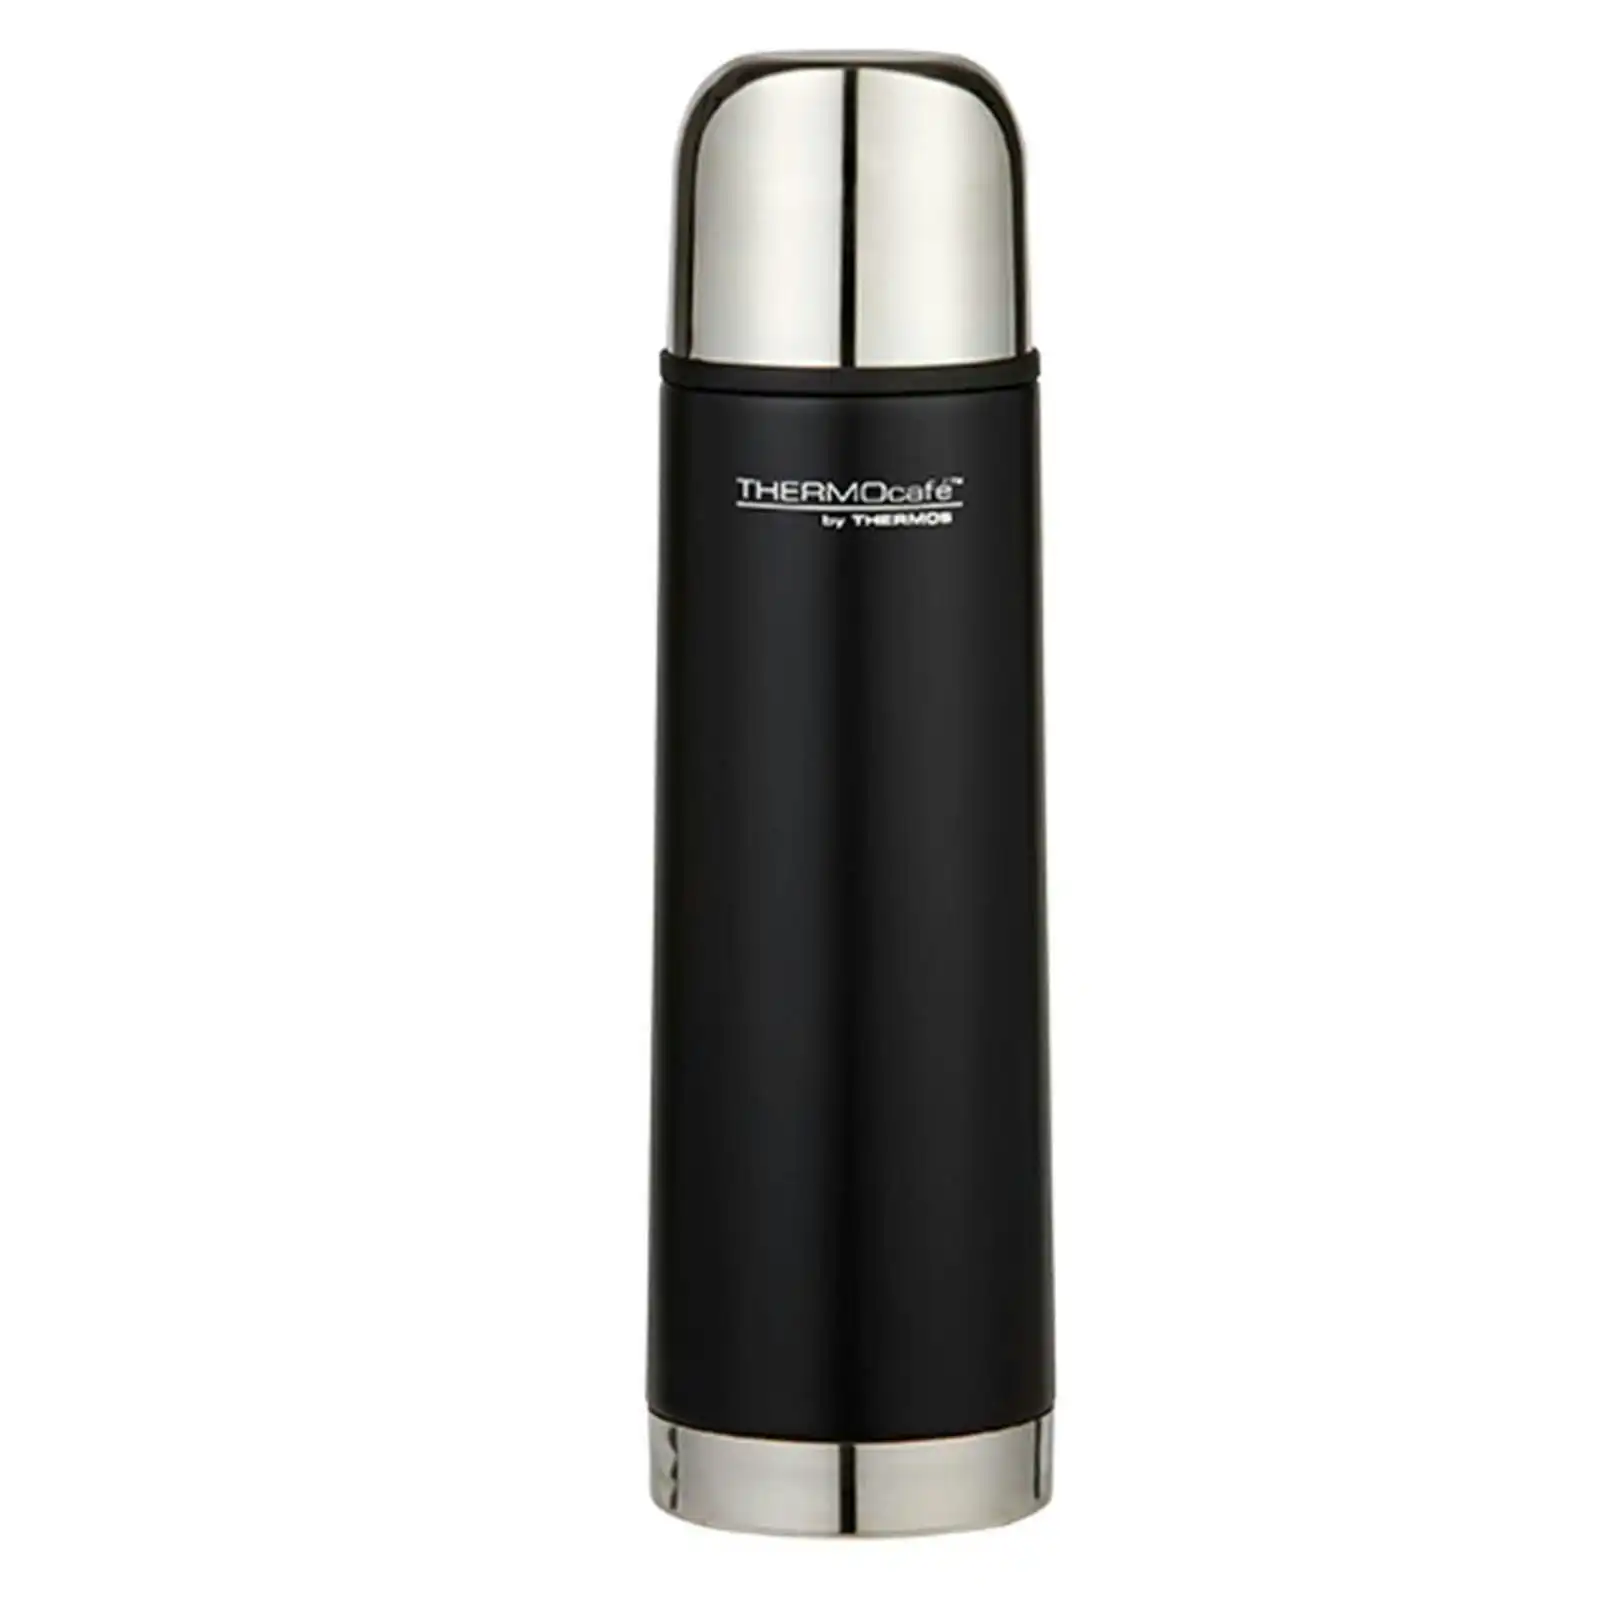 Thermos Thermocafe1 Litre Stainless Steel Slim Vacuum Insulated Flask   Black